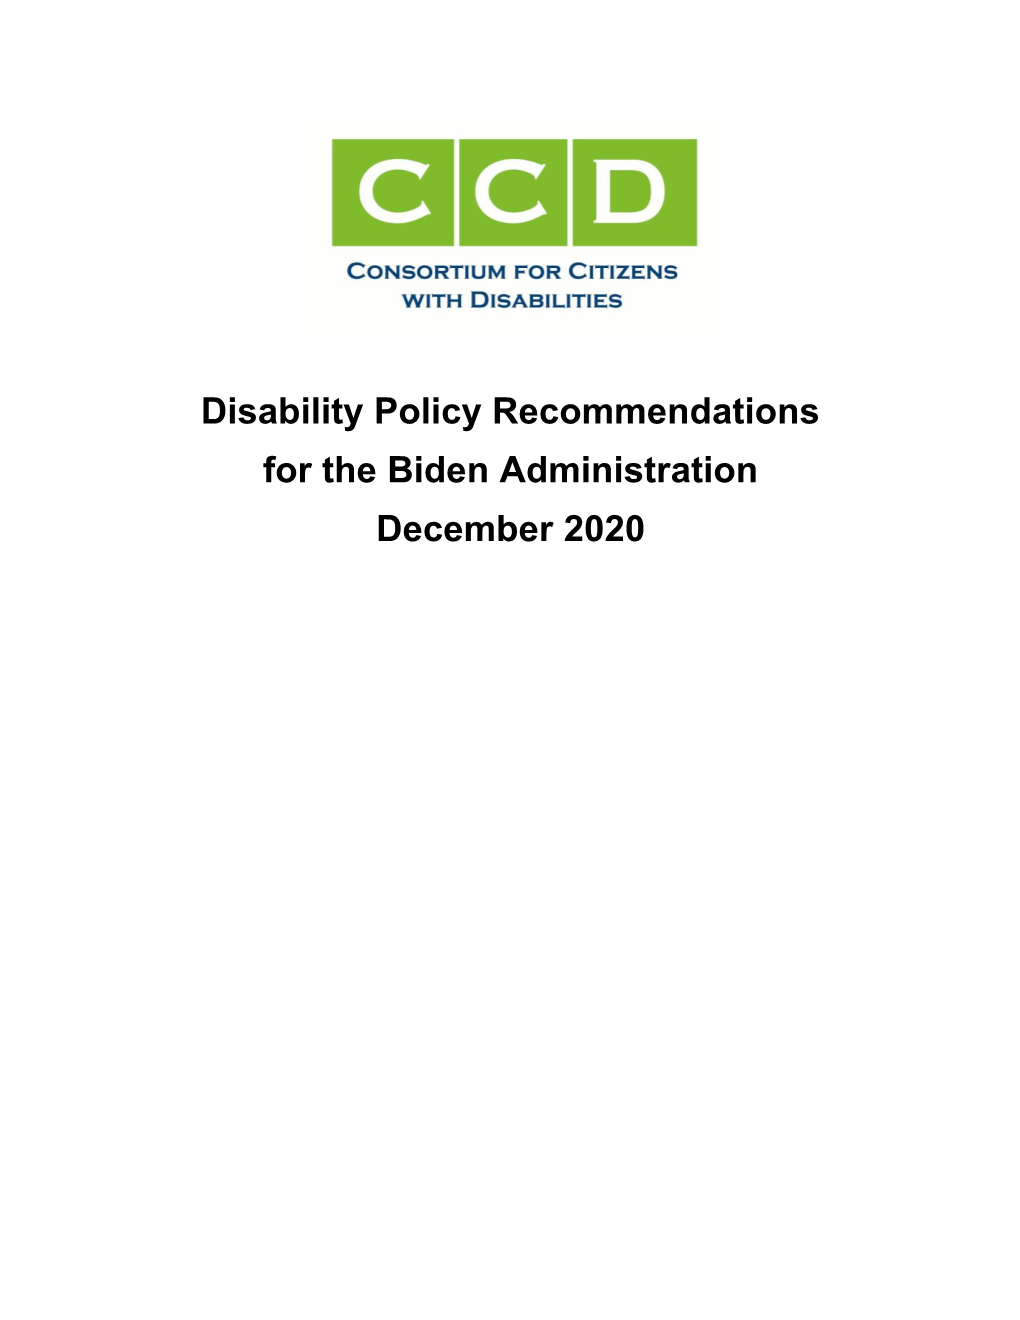 DD, Autism & Family Support TF Principles for Biden Administration